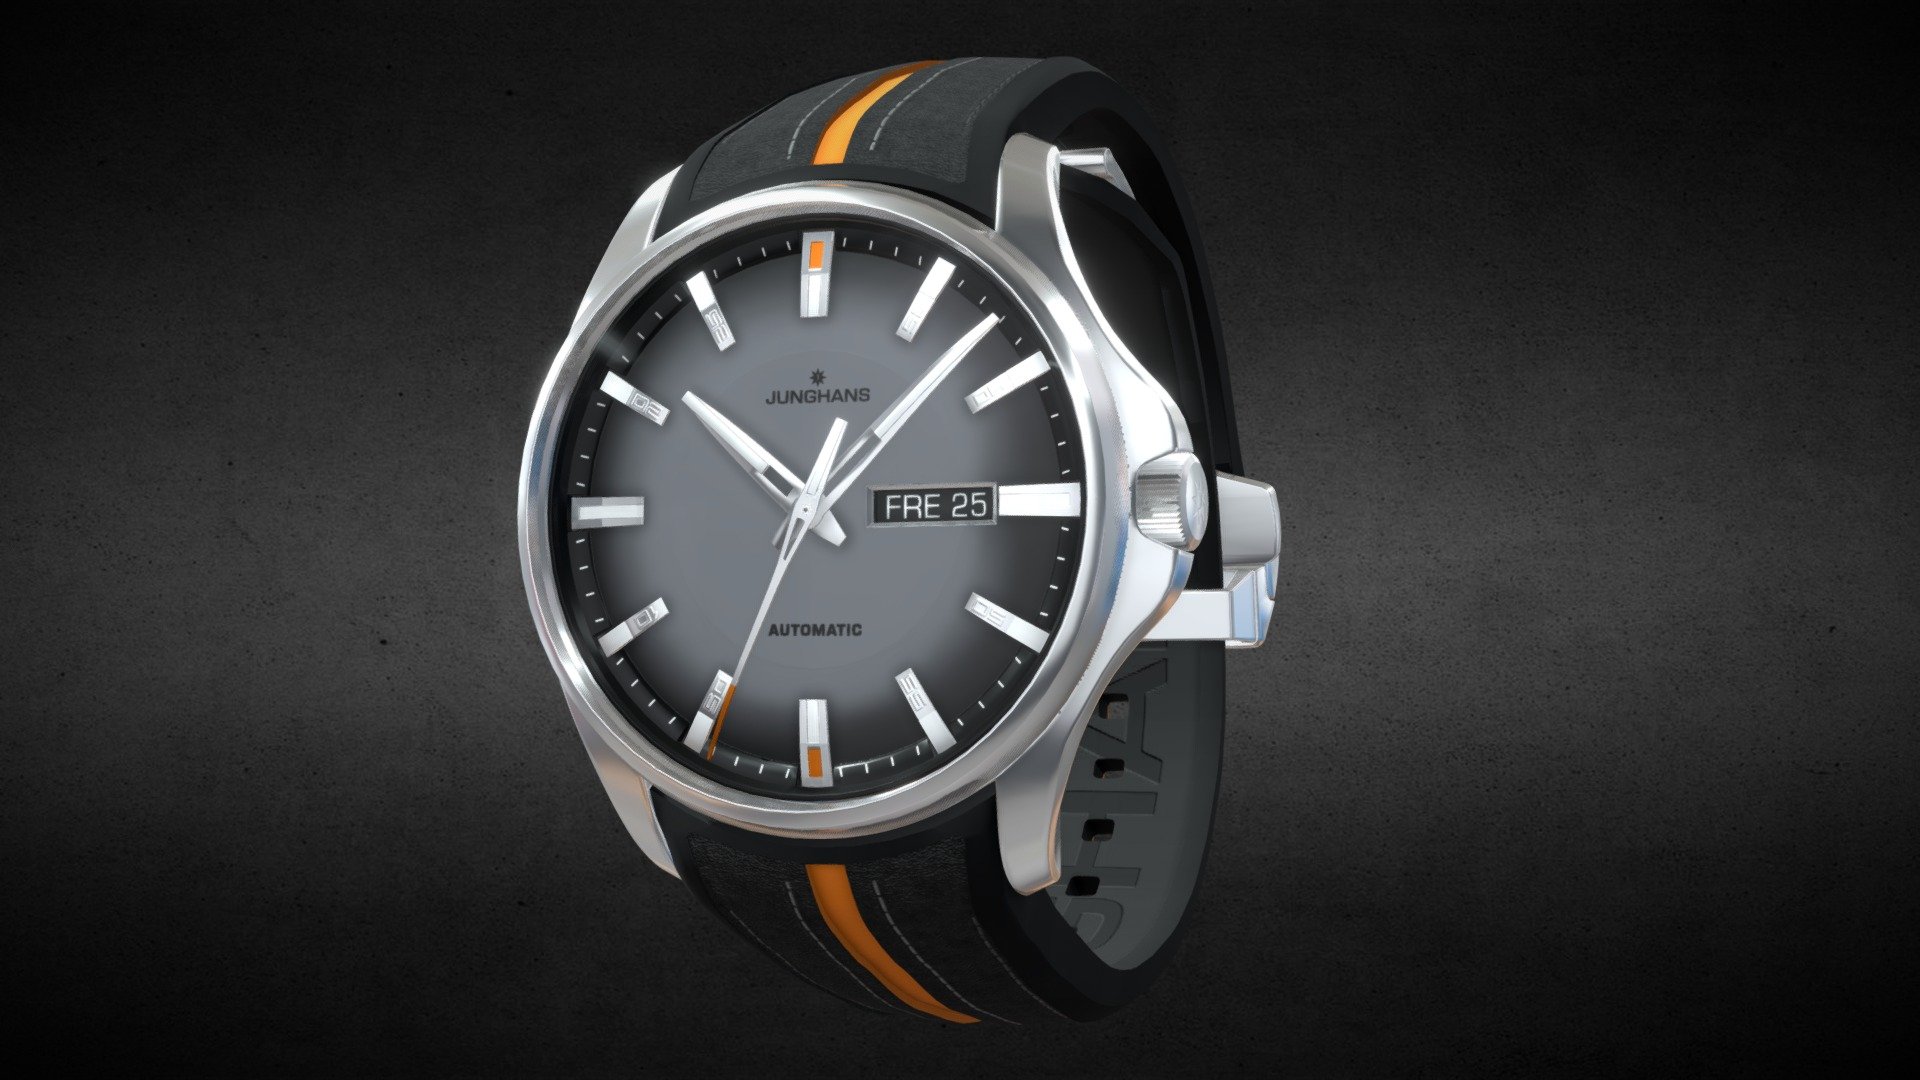 Awesome stainless steel Meister S Automatic․
Use for Unreal Engine 4 and Unity3D. Try in augmented reality in the AR-Watches app. 
Links to the app: Android, iOS

Currently available for download in FBX format.

3D model developed by AR-Watches

Disclaimer: We do not own the design of the watch, we only made the 3D model 3d model